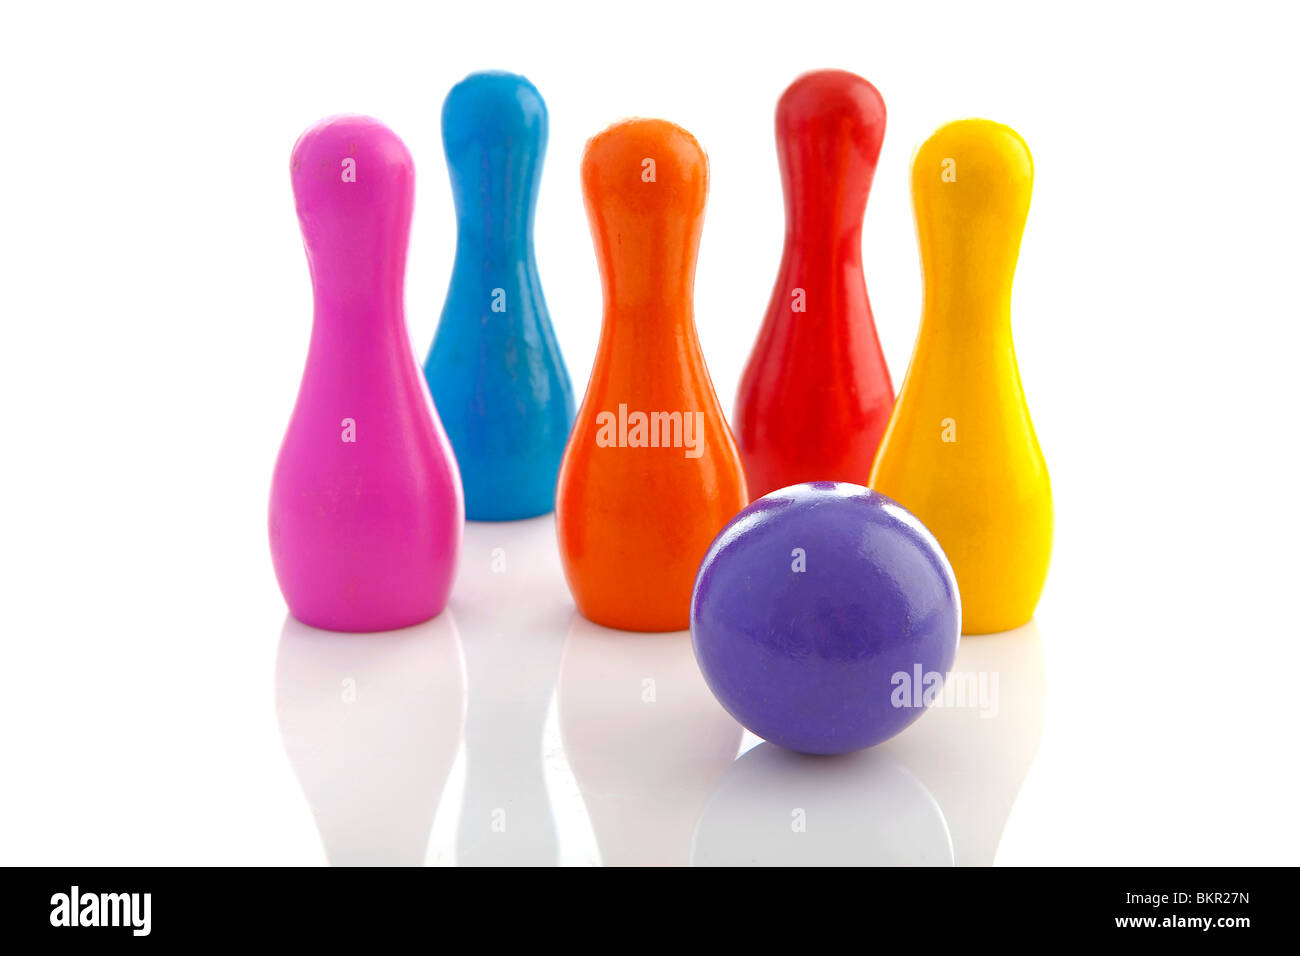 colorful bowling pins and ball isolated on white background Stock Photo